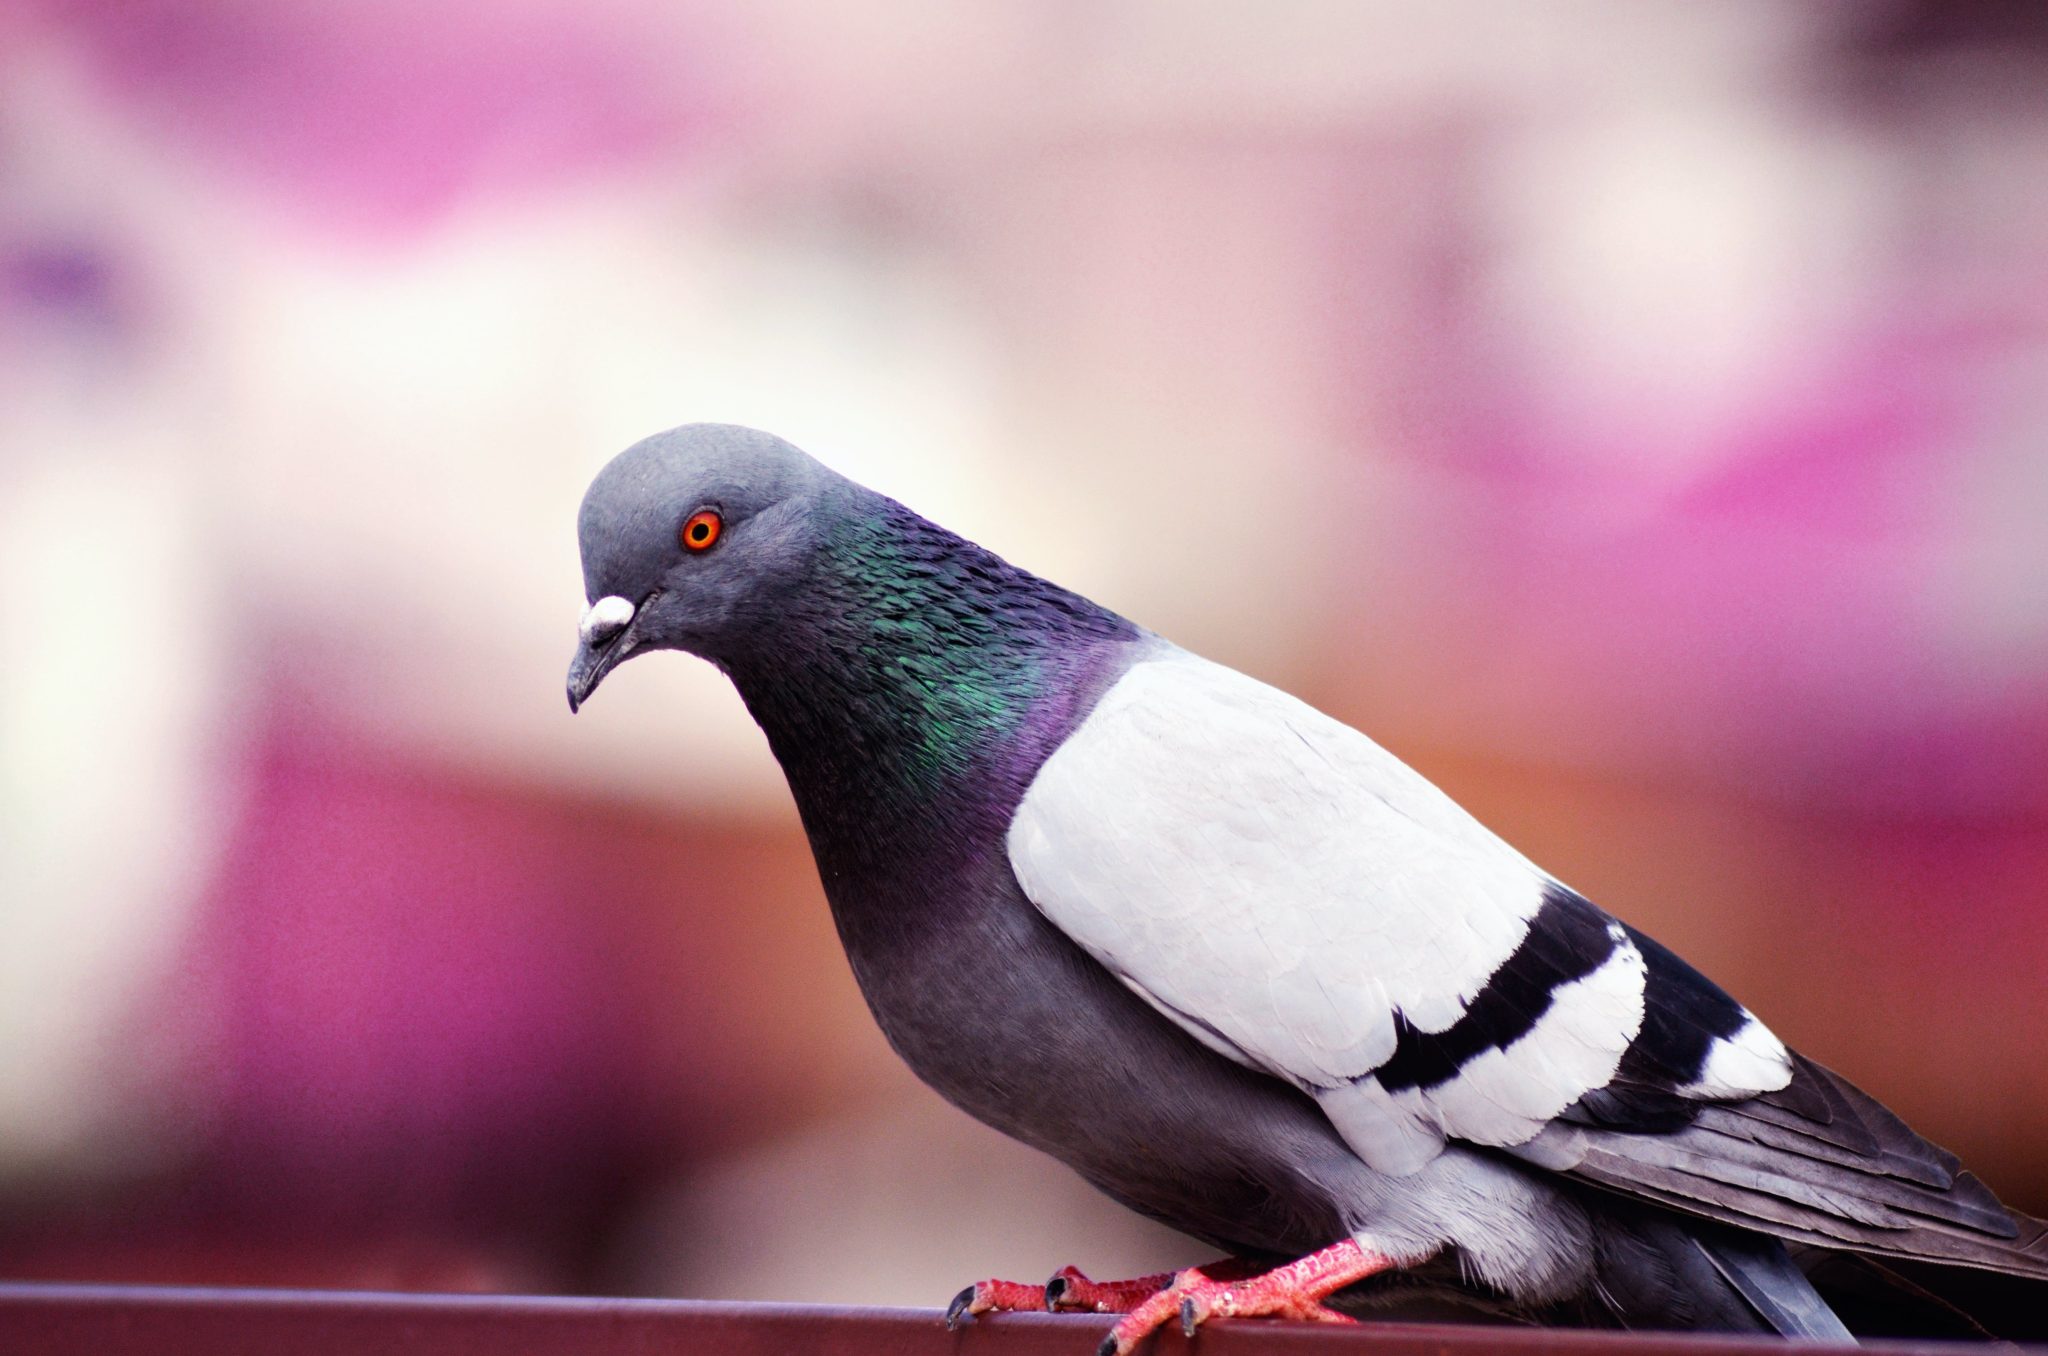 In defence of pigeons